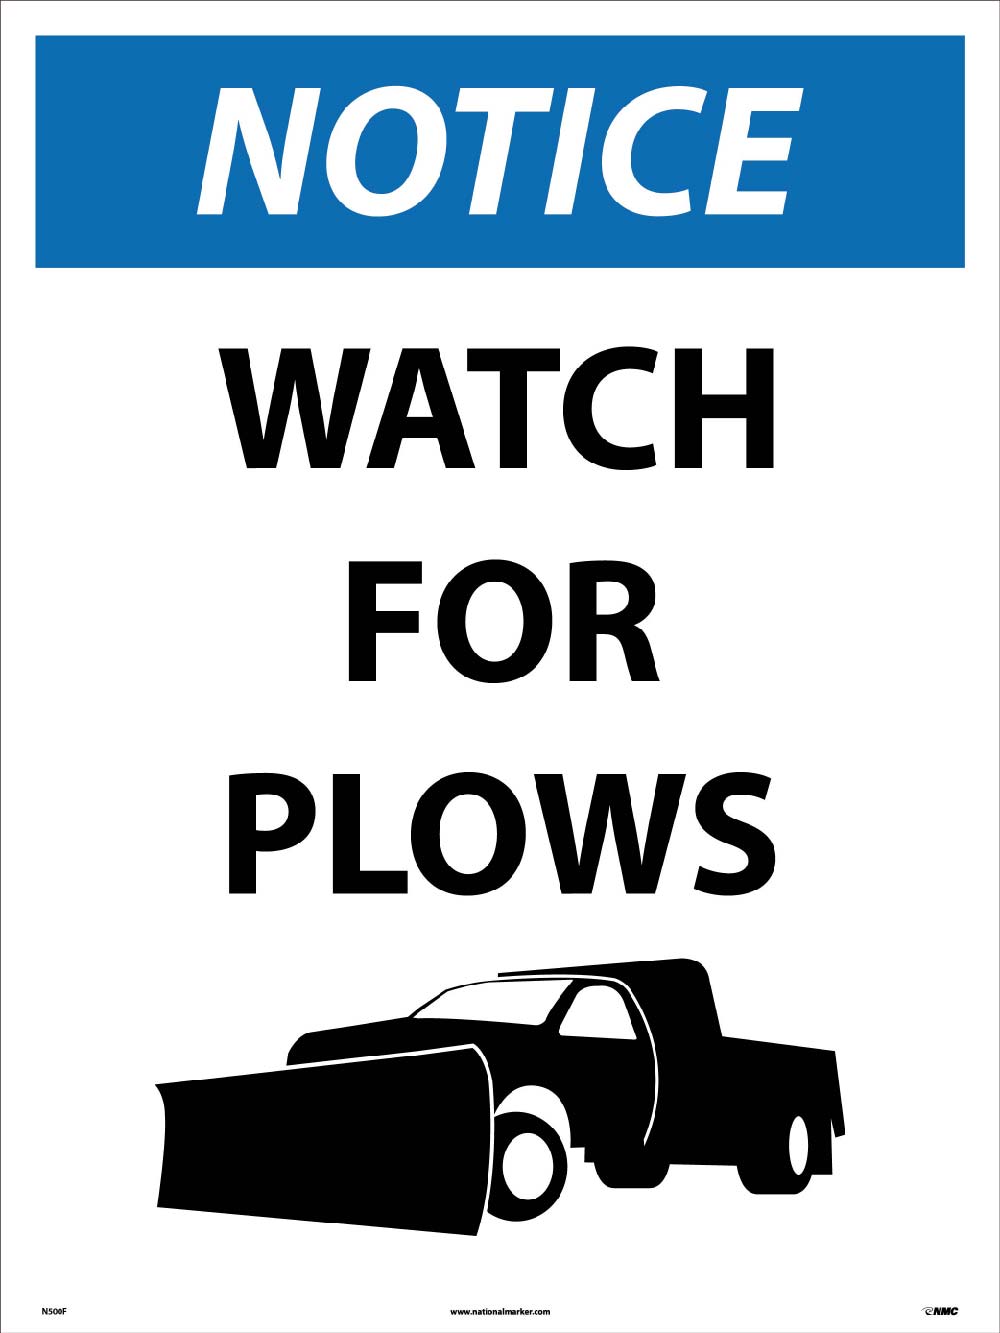 Notice Watch For Plows Sign-eSafety Supplies, Inc